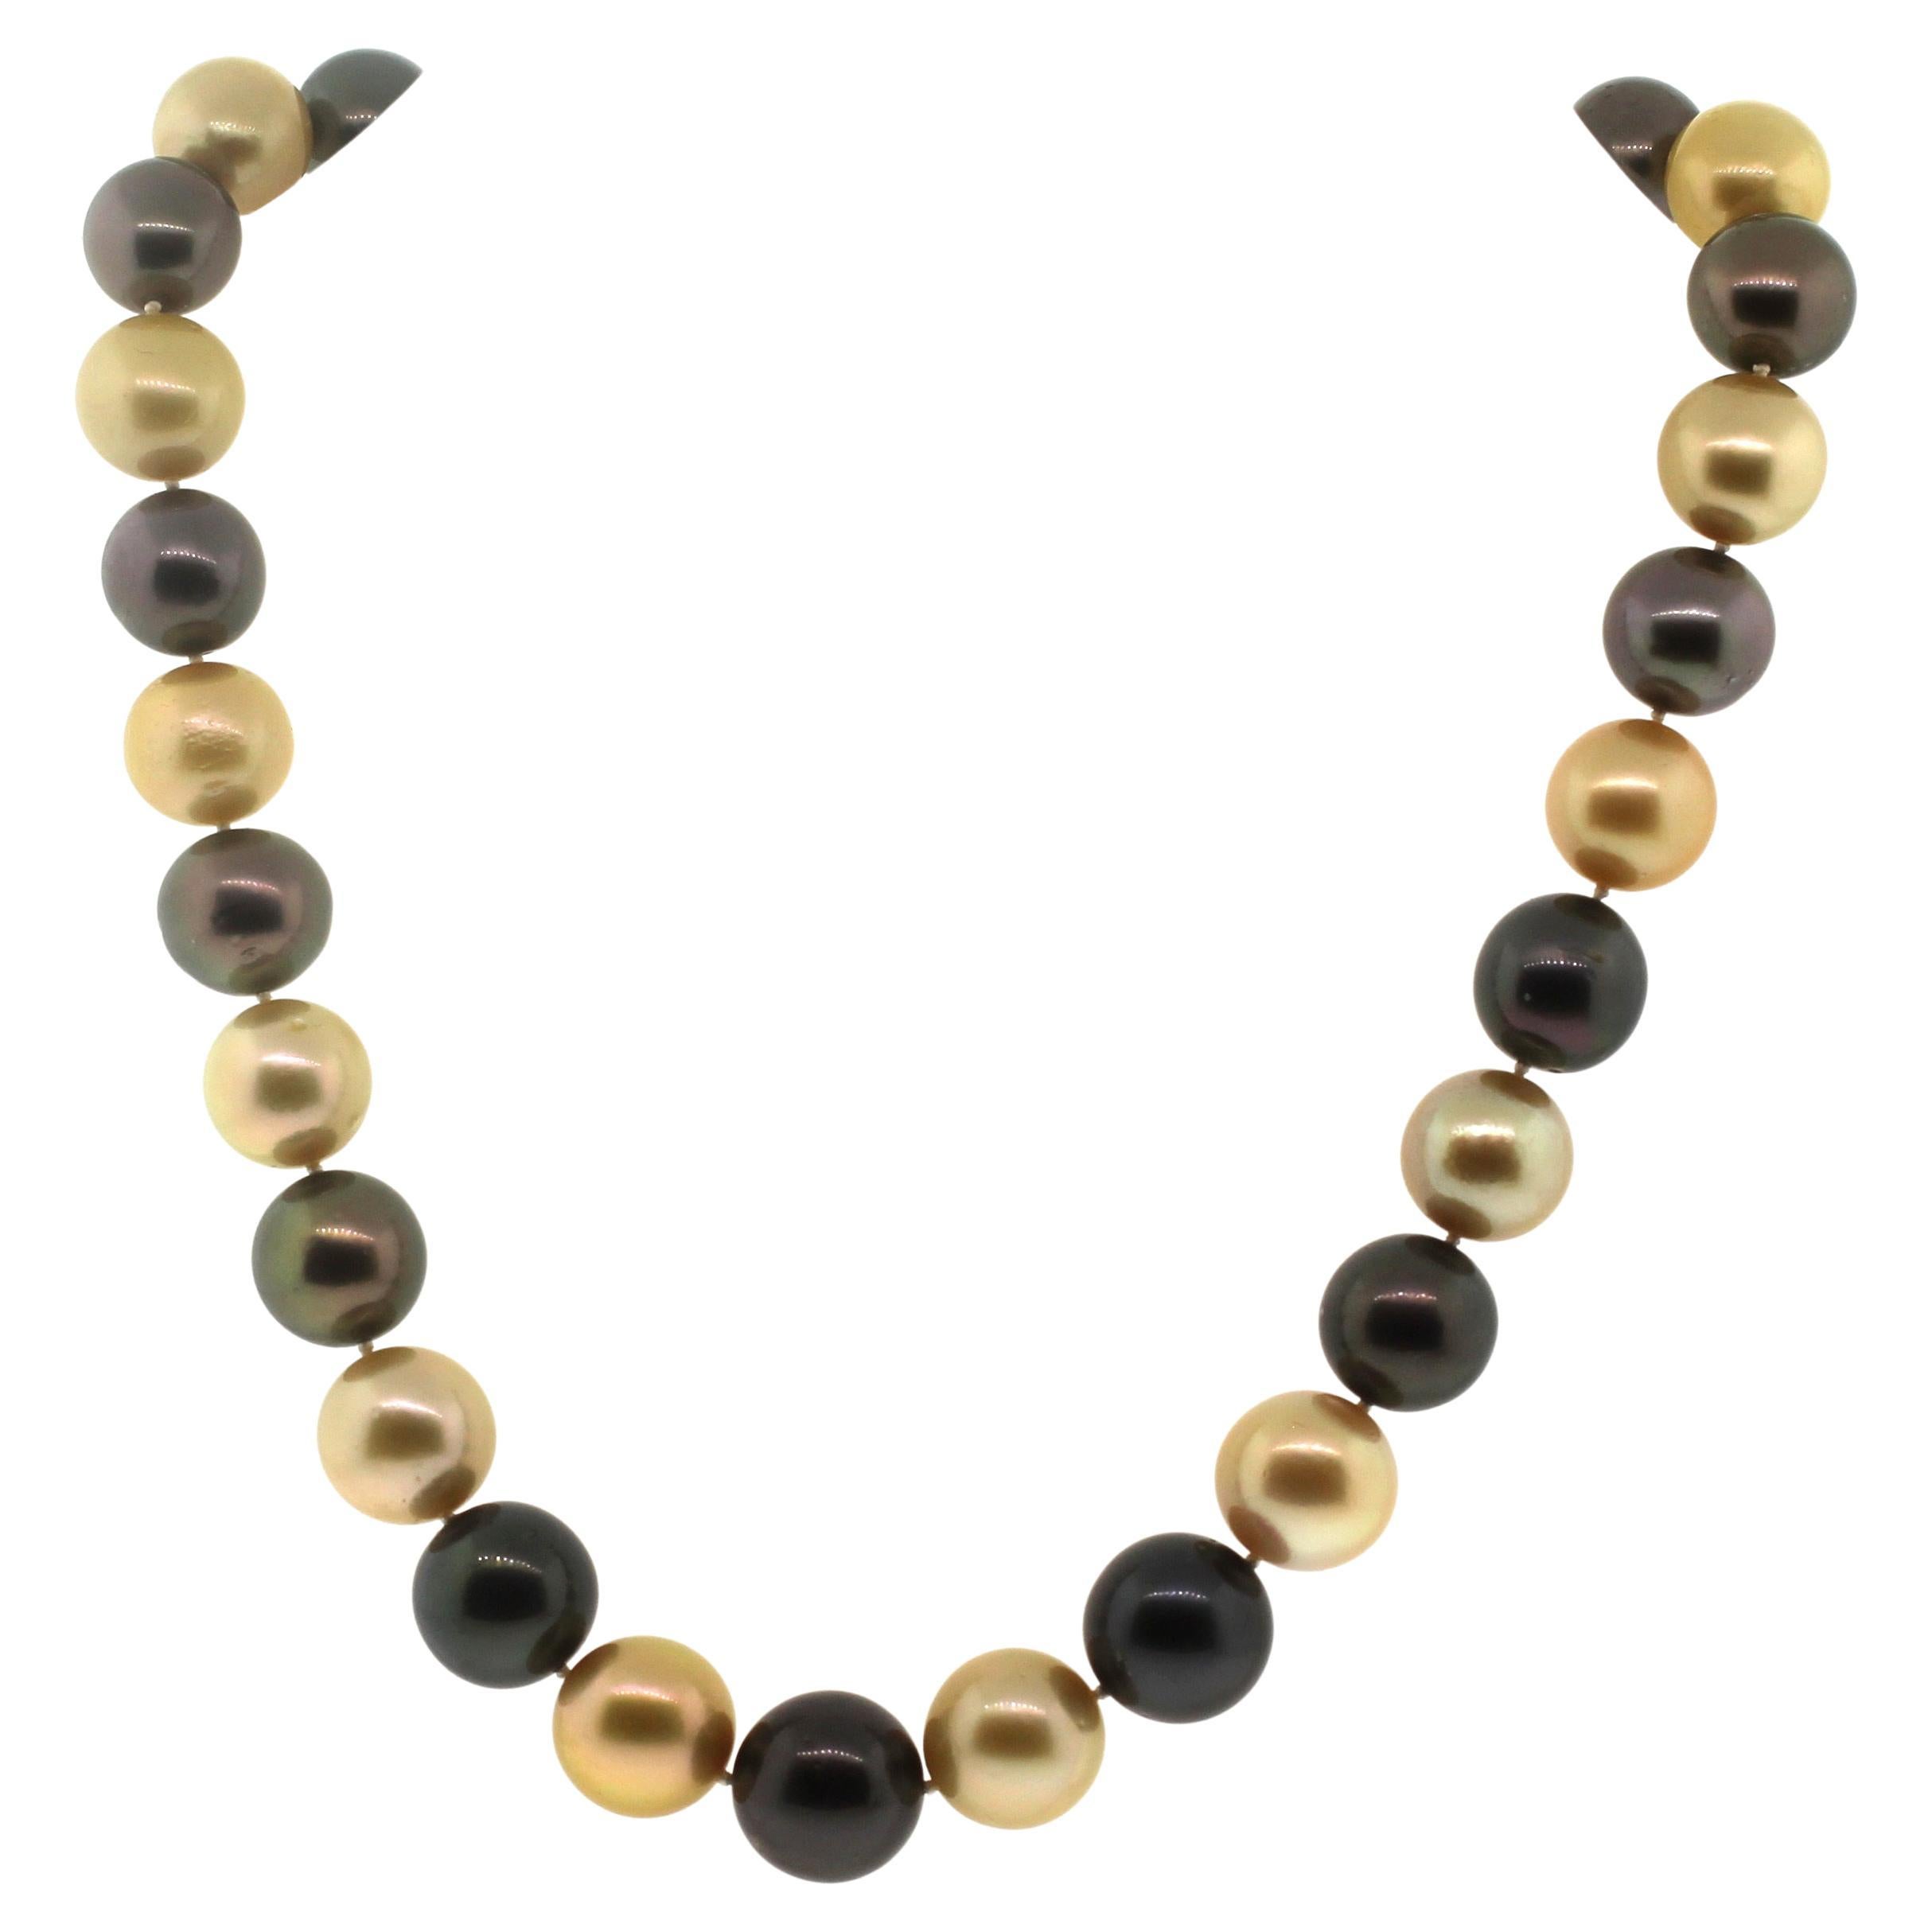 Hakimoto By Jewel Of Ocean
Manufacture Suggested Retail Price $36,000
31 Black Tahitian and Golden South Sea 12x14.5mm Pearl 18K Diamond Clasp Necklace
17.5